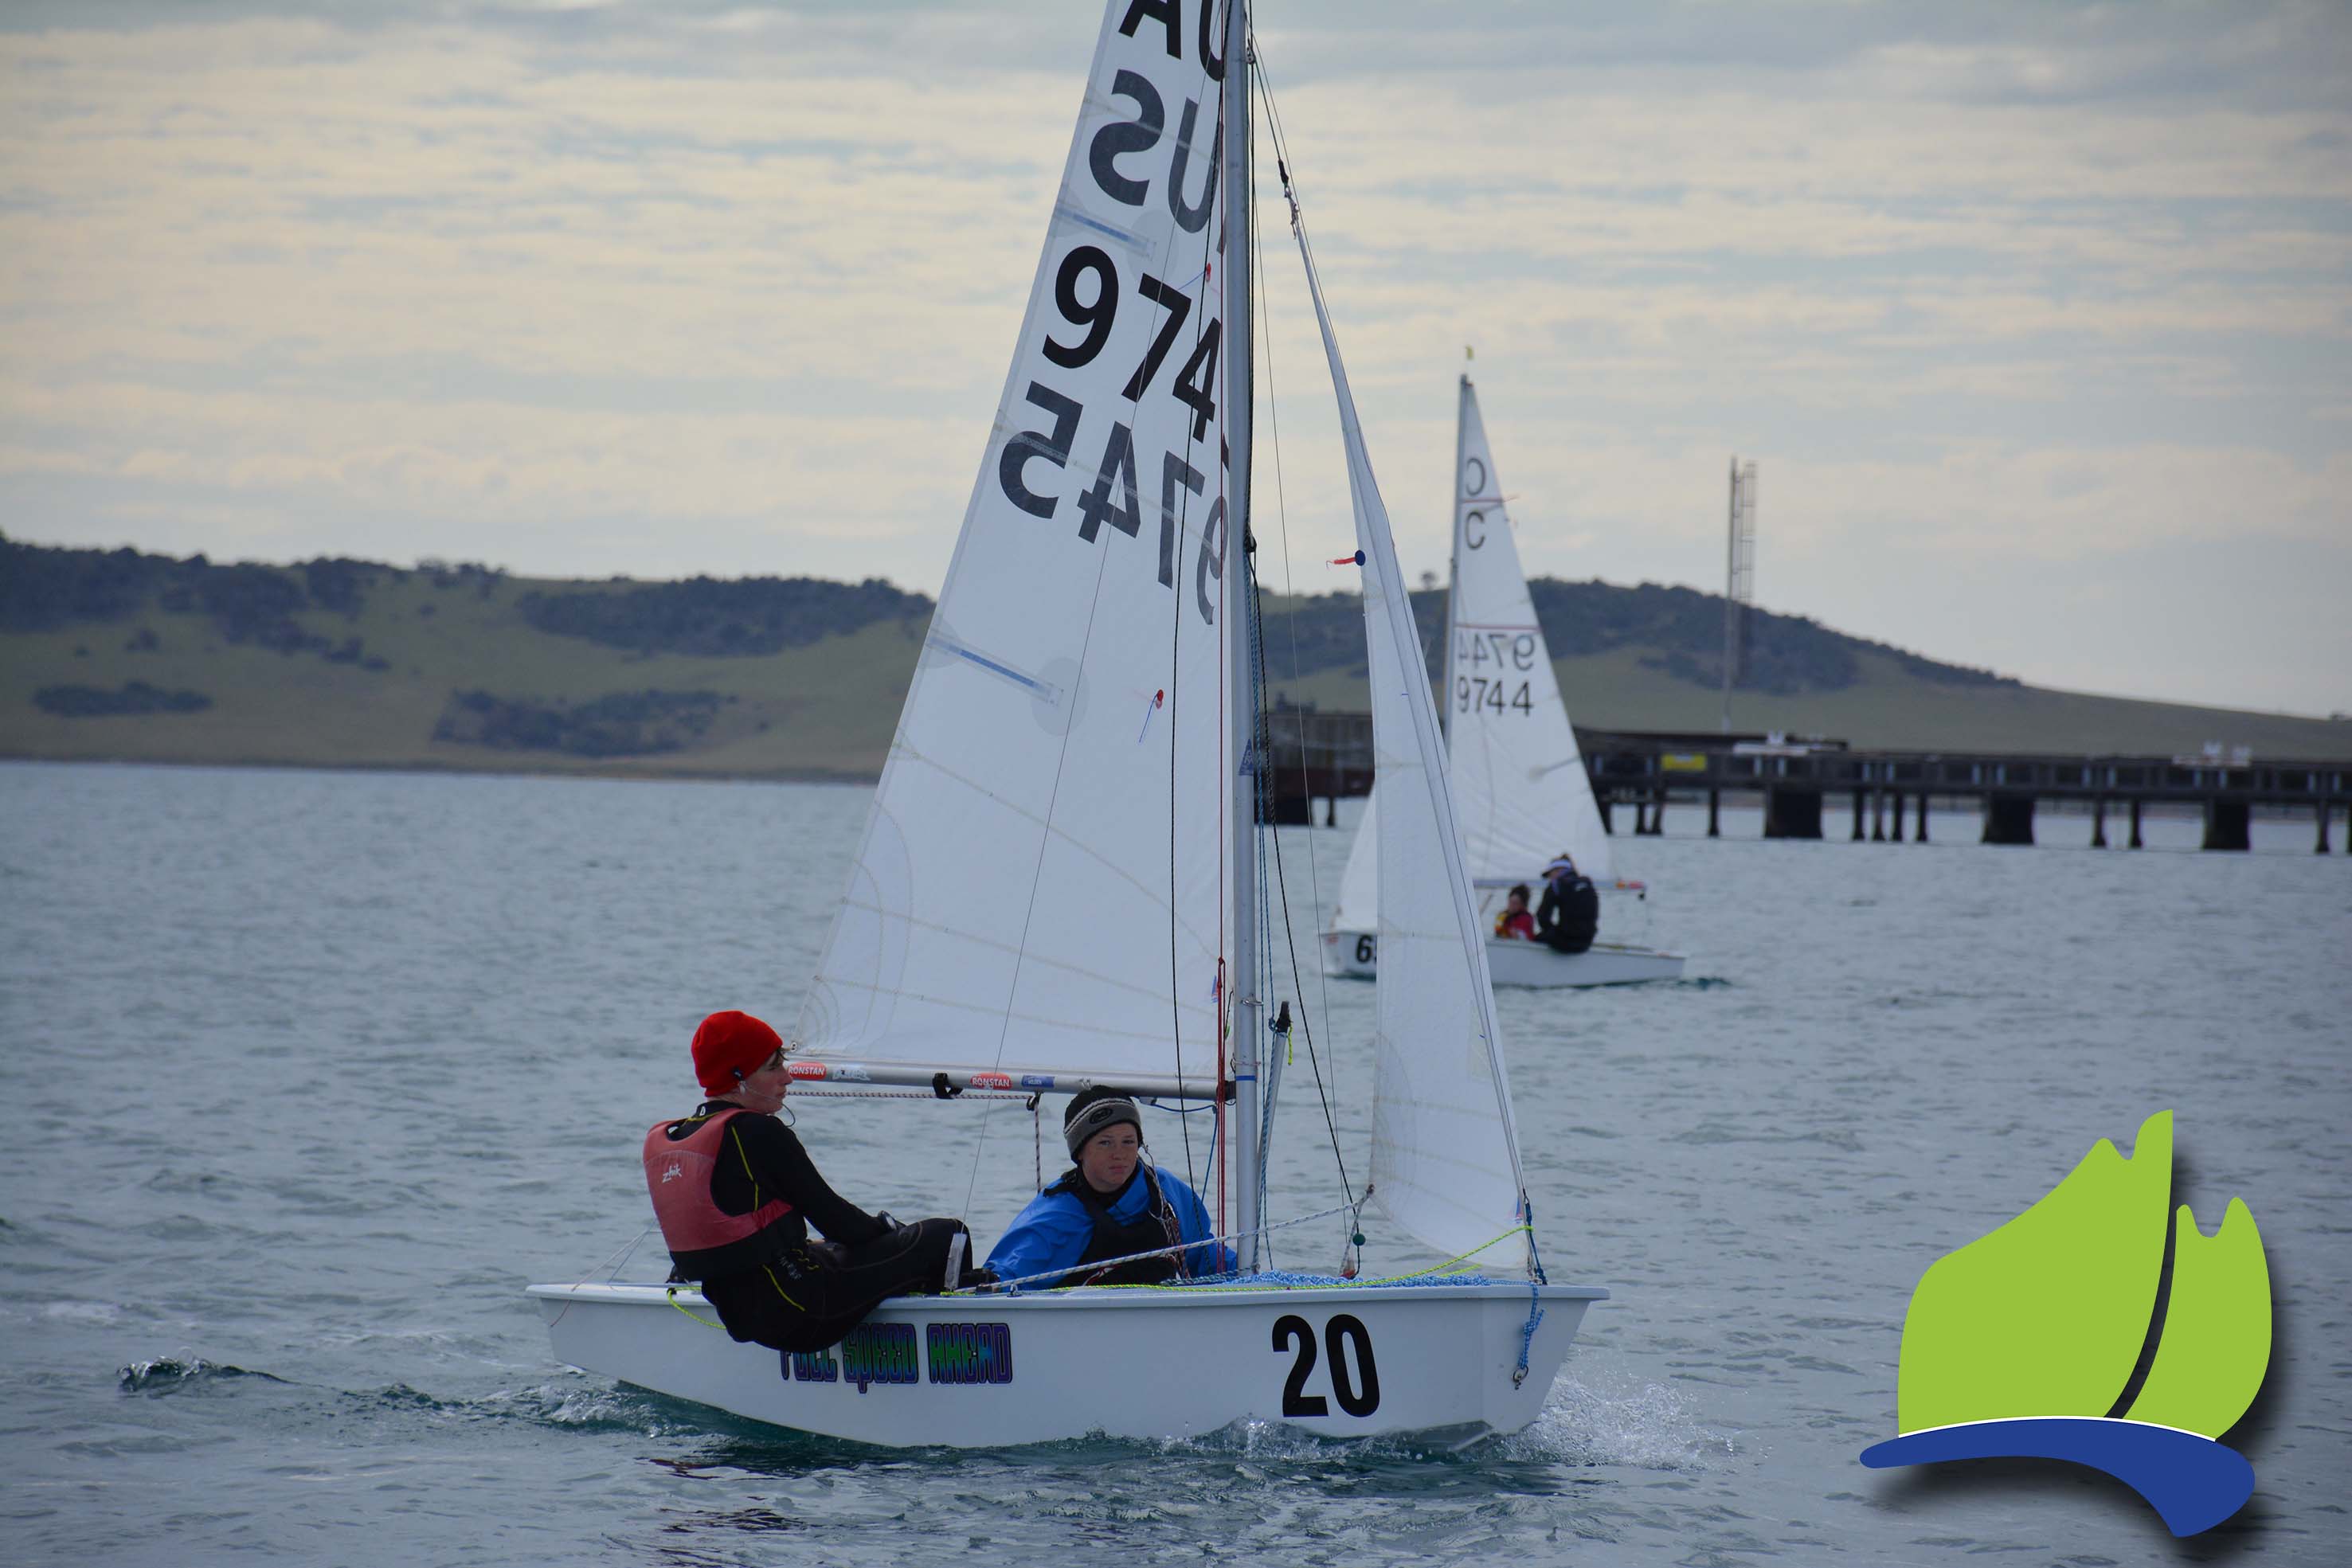 Sam Paynter and Gil Casanova in Full Speed Ahead (Port Lincoln) were the winners in the international cadet at the first leg of the Tri Series.